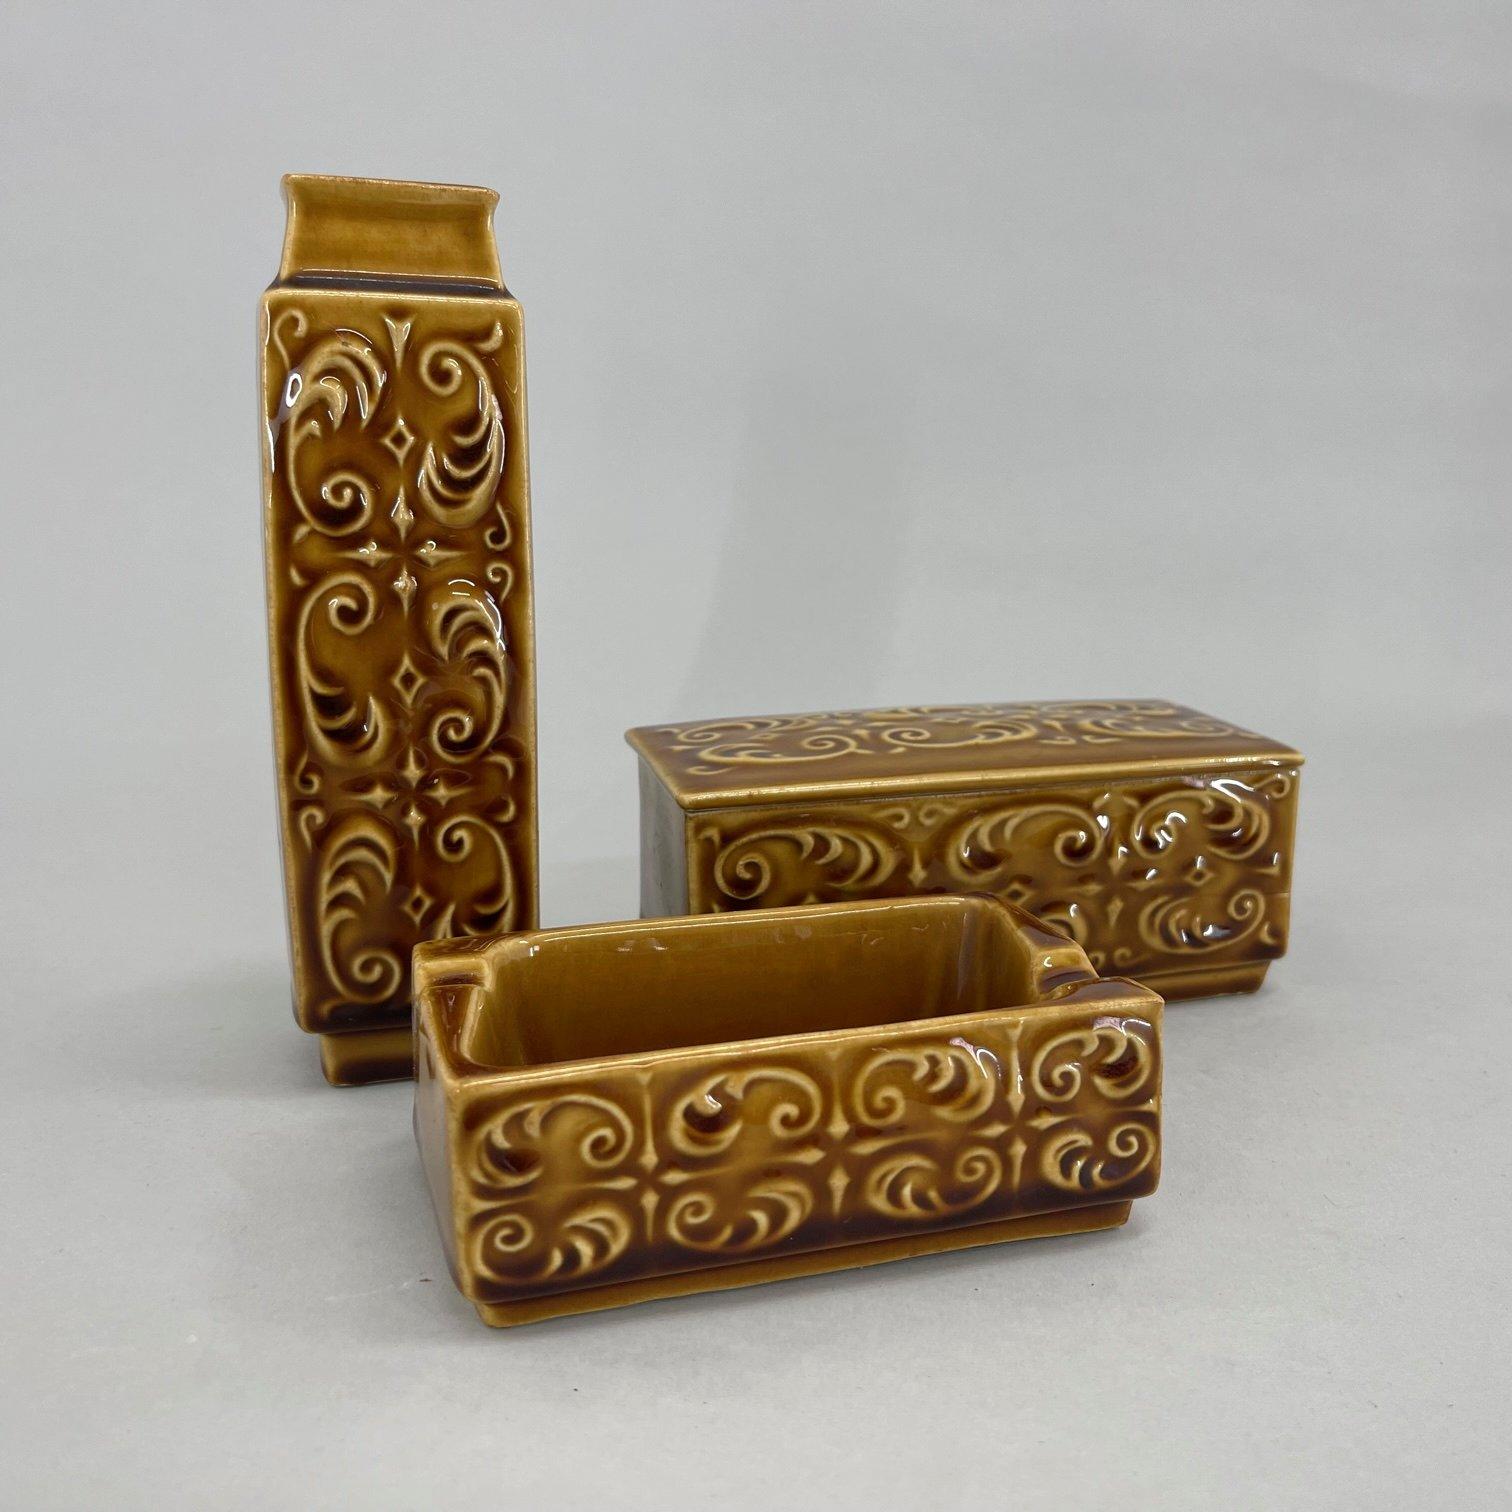 Glazed Set of Ceramic Vase, Ashtray and Box by Ditmar Urbach, 1960's For Sale